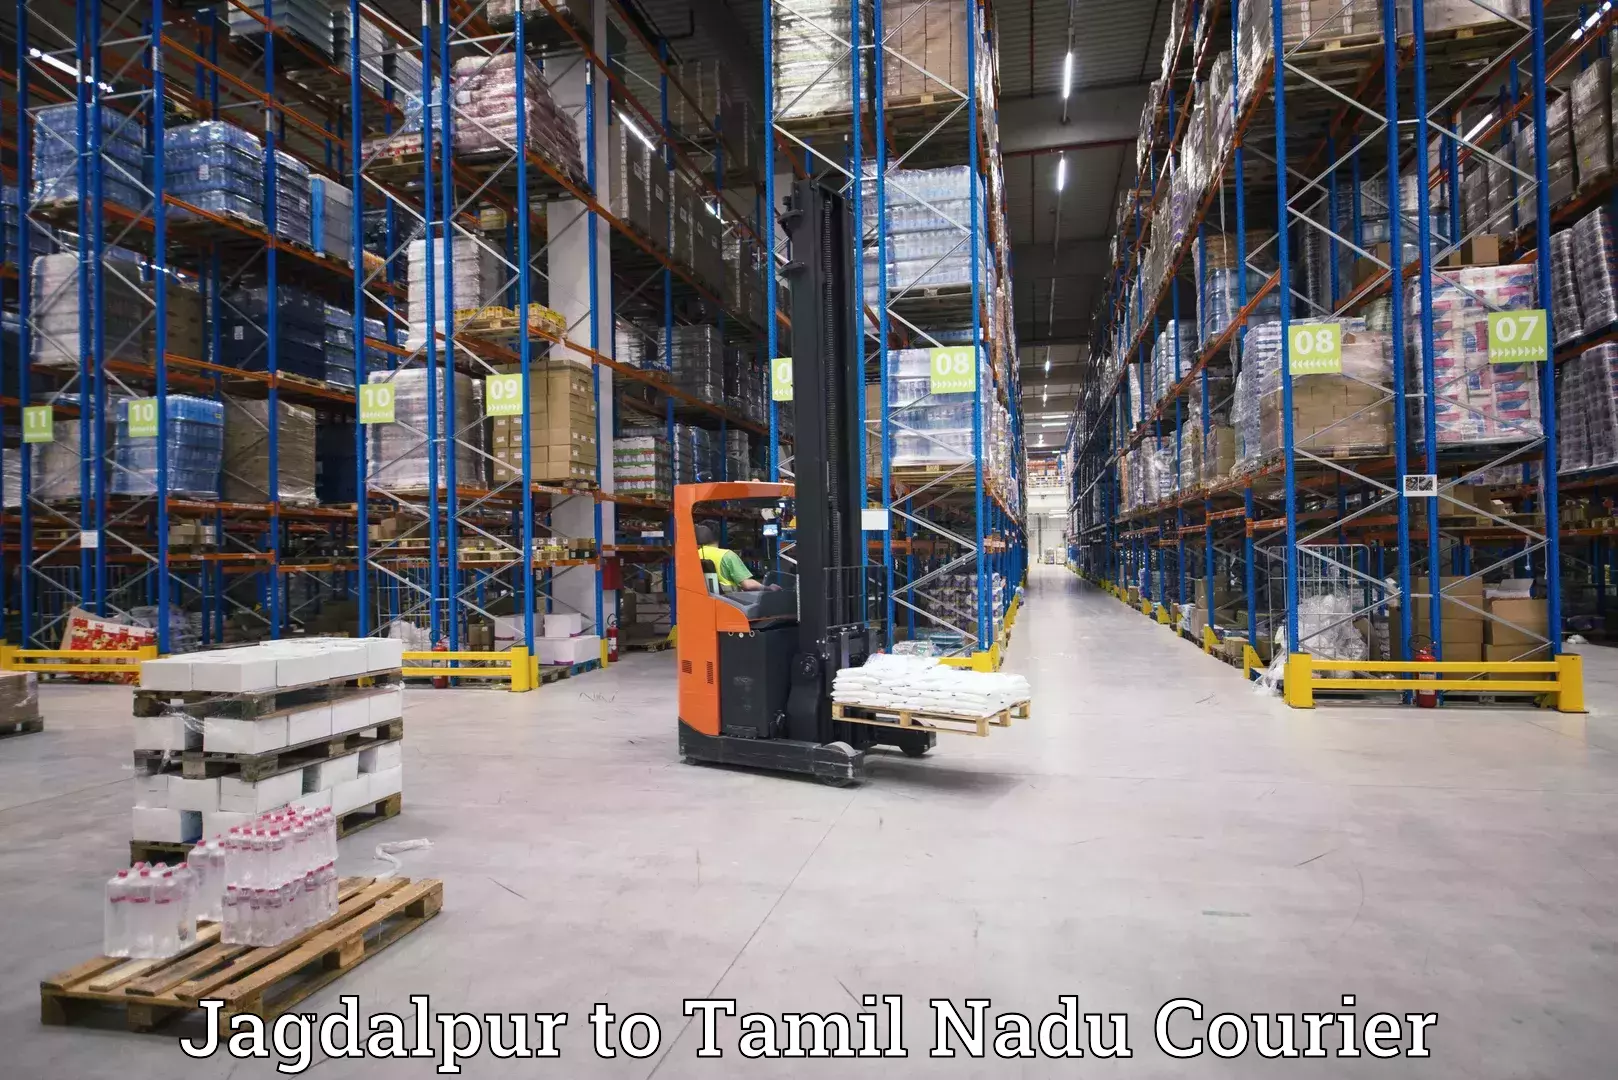 Subscription-based courier Jagdalpur to Ennore Port Chennai